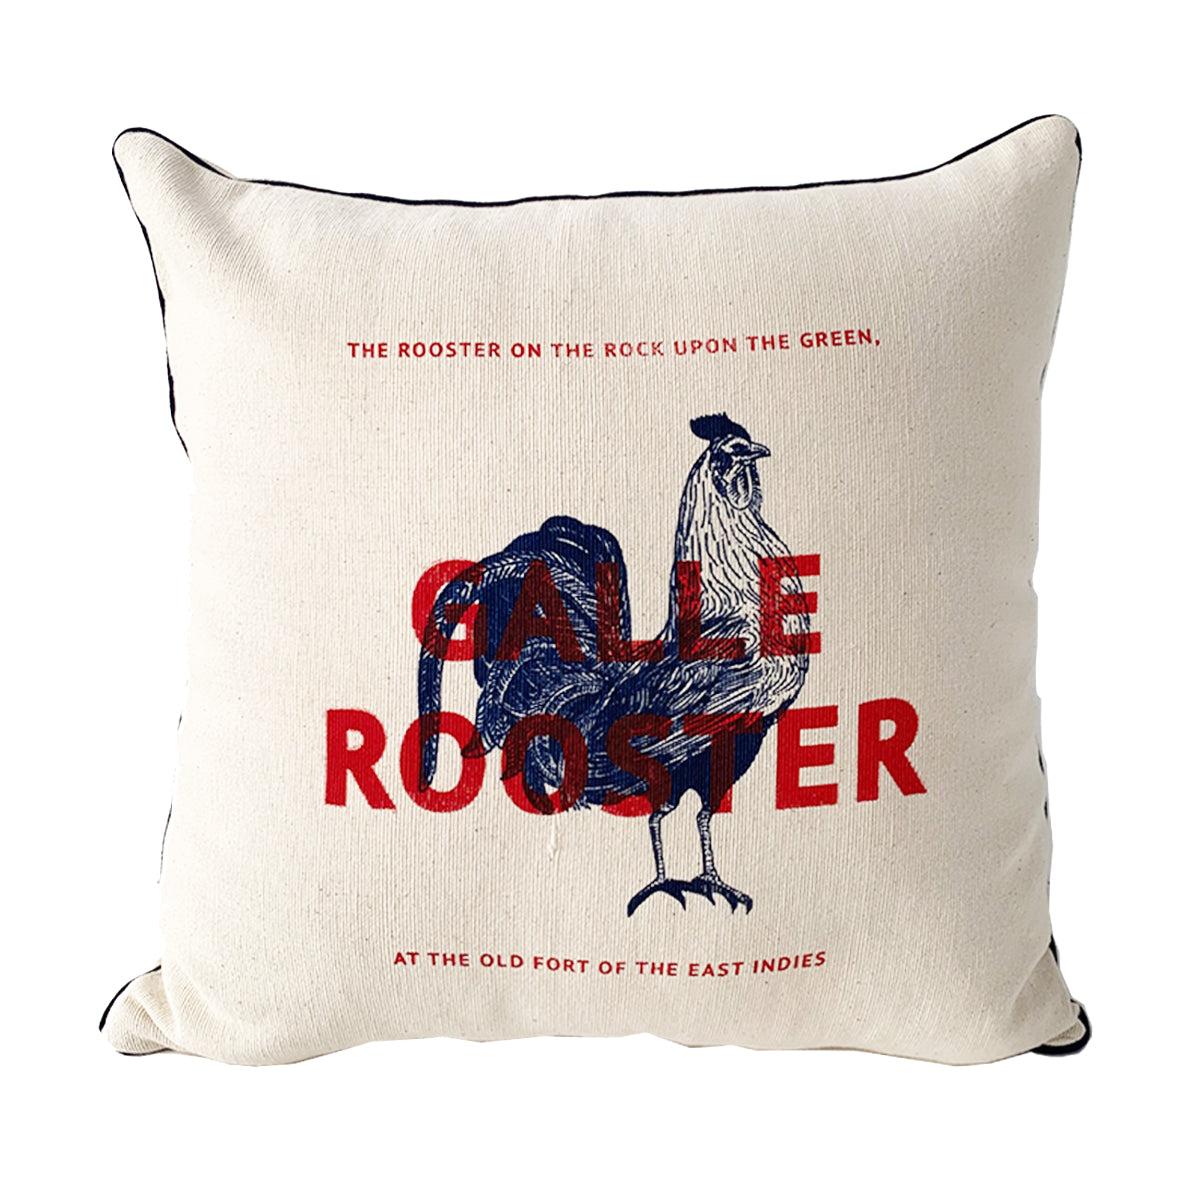 City Graphics - Galle Rooster Cushion Cover